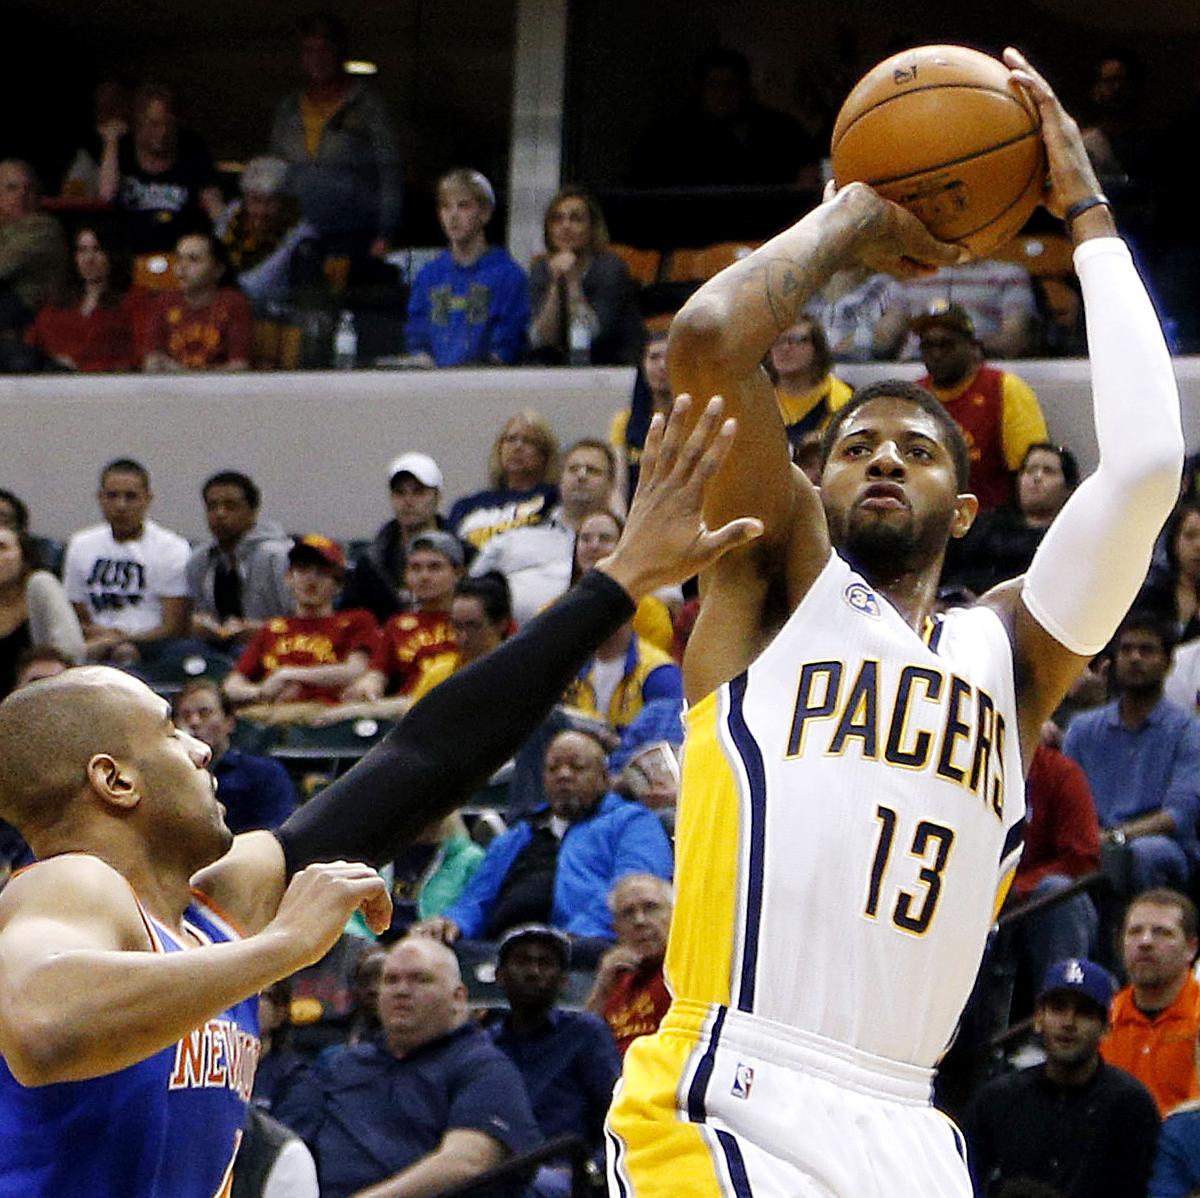 Knicks vs. Pacers Score, Video Highlights and Recap from April 12